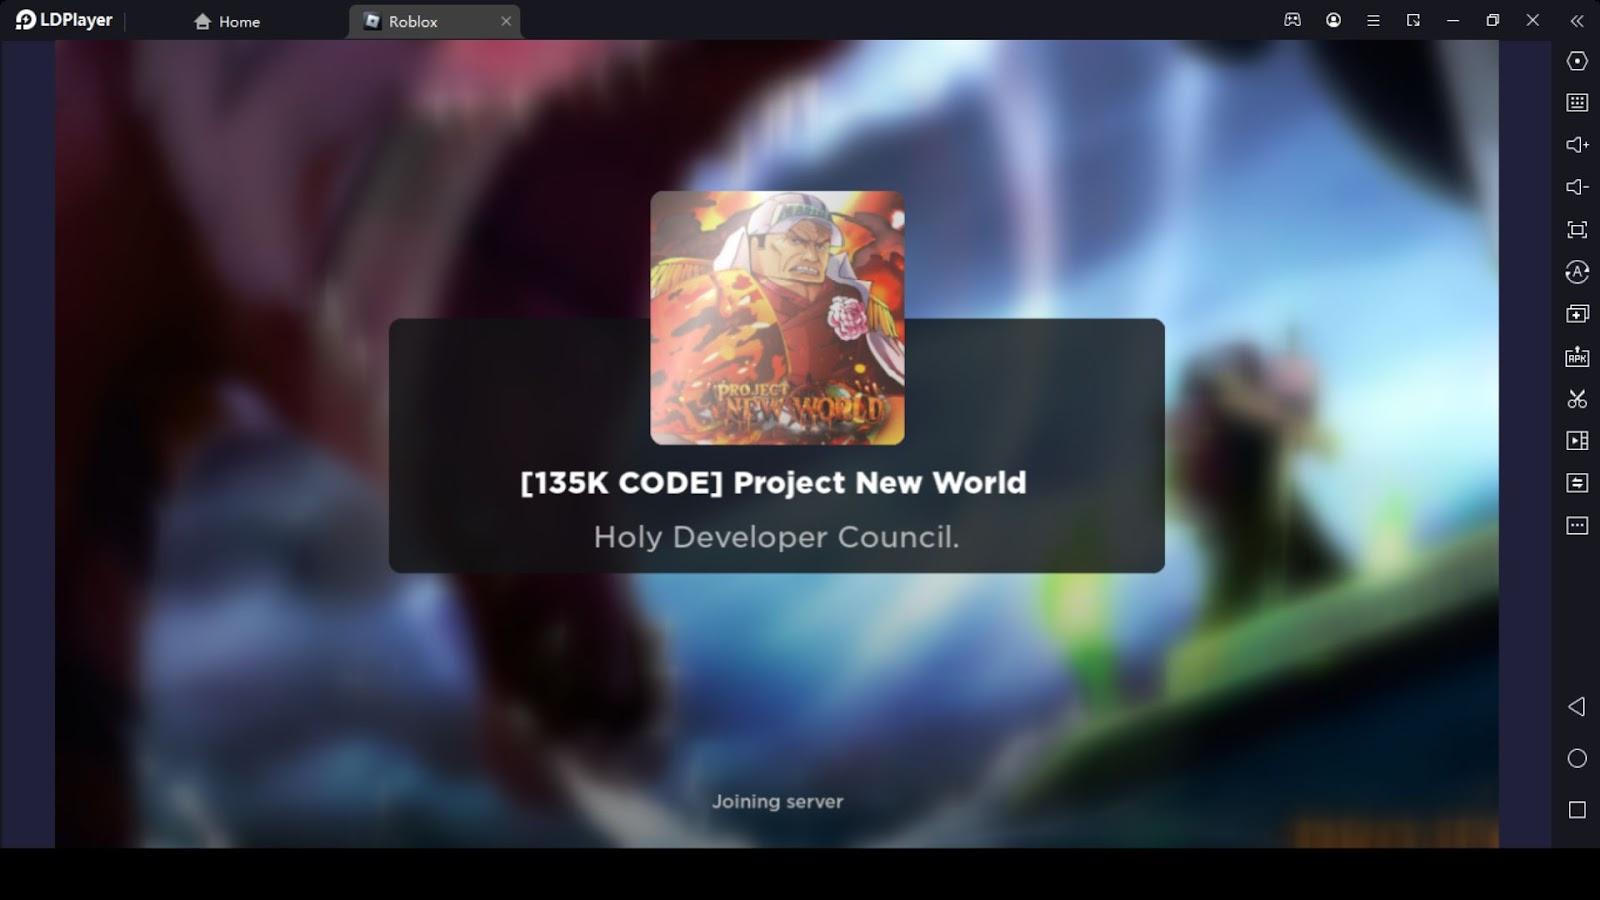 *NEW* ALL WORKING CODES FOR PROJECT NEW WORLD IN